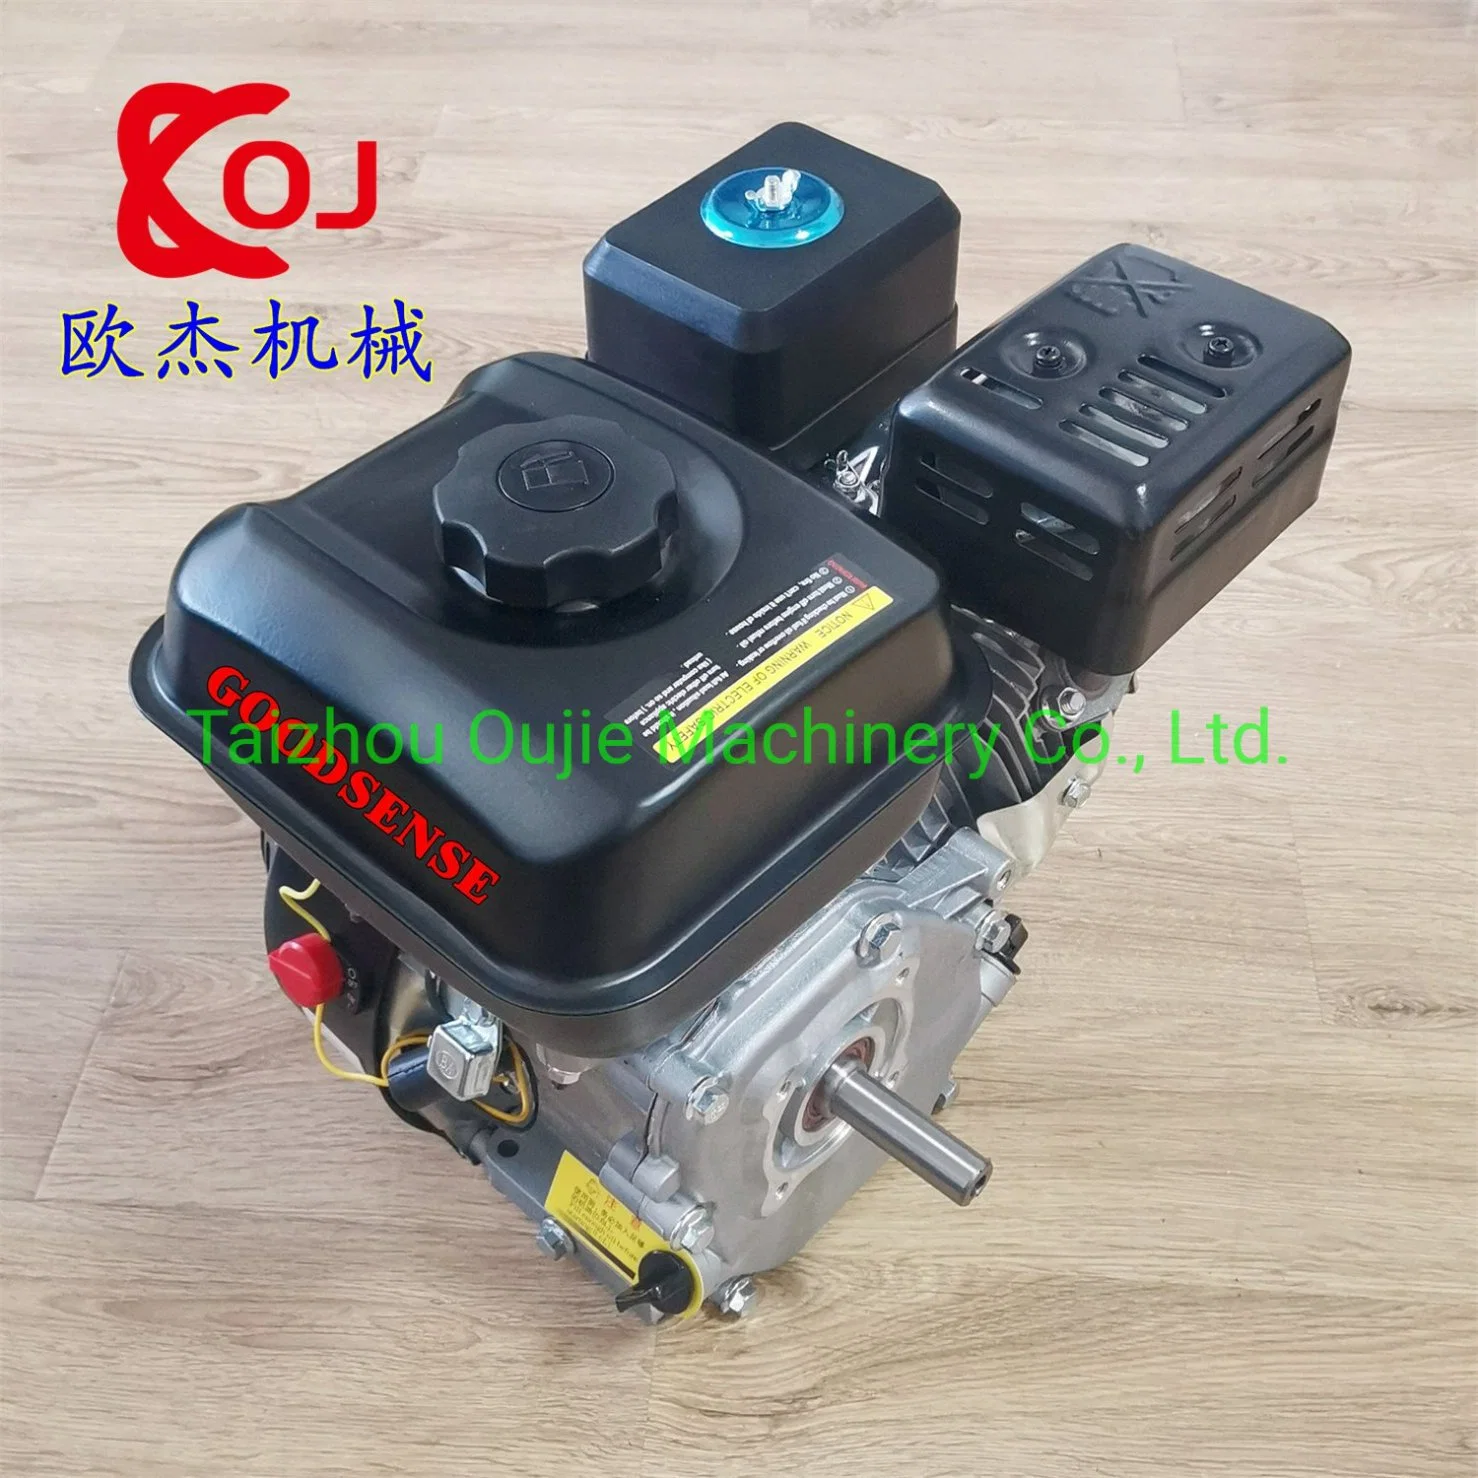 Goodsense Brand Factory Directly Supplies The General Gasoline Engine 168 Power 5.5HP High Cost Performance and Fuel Saving